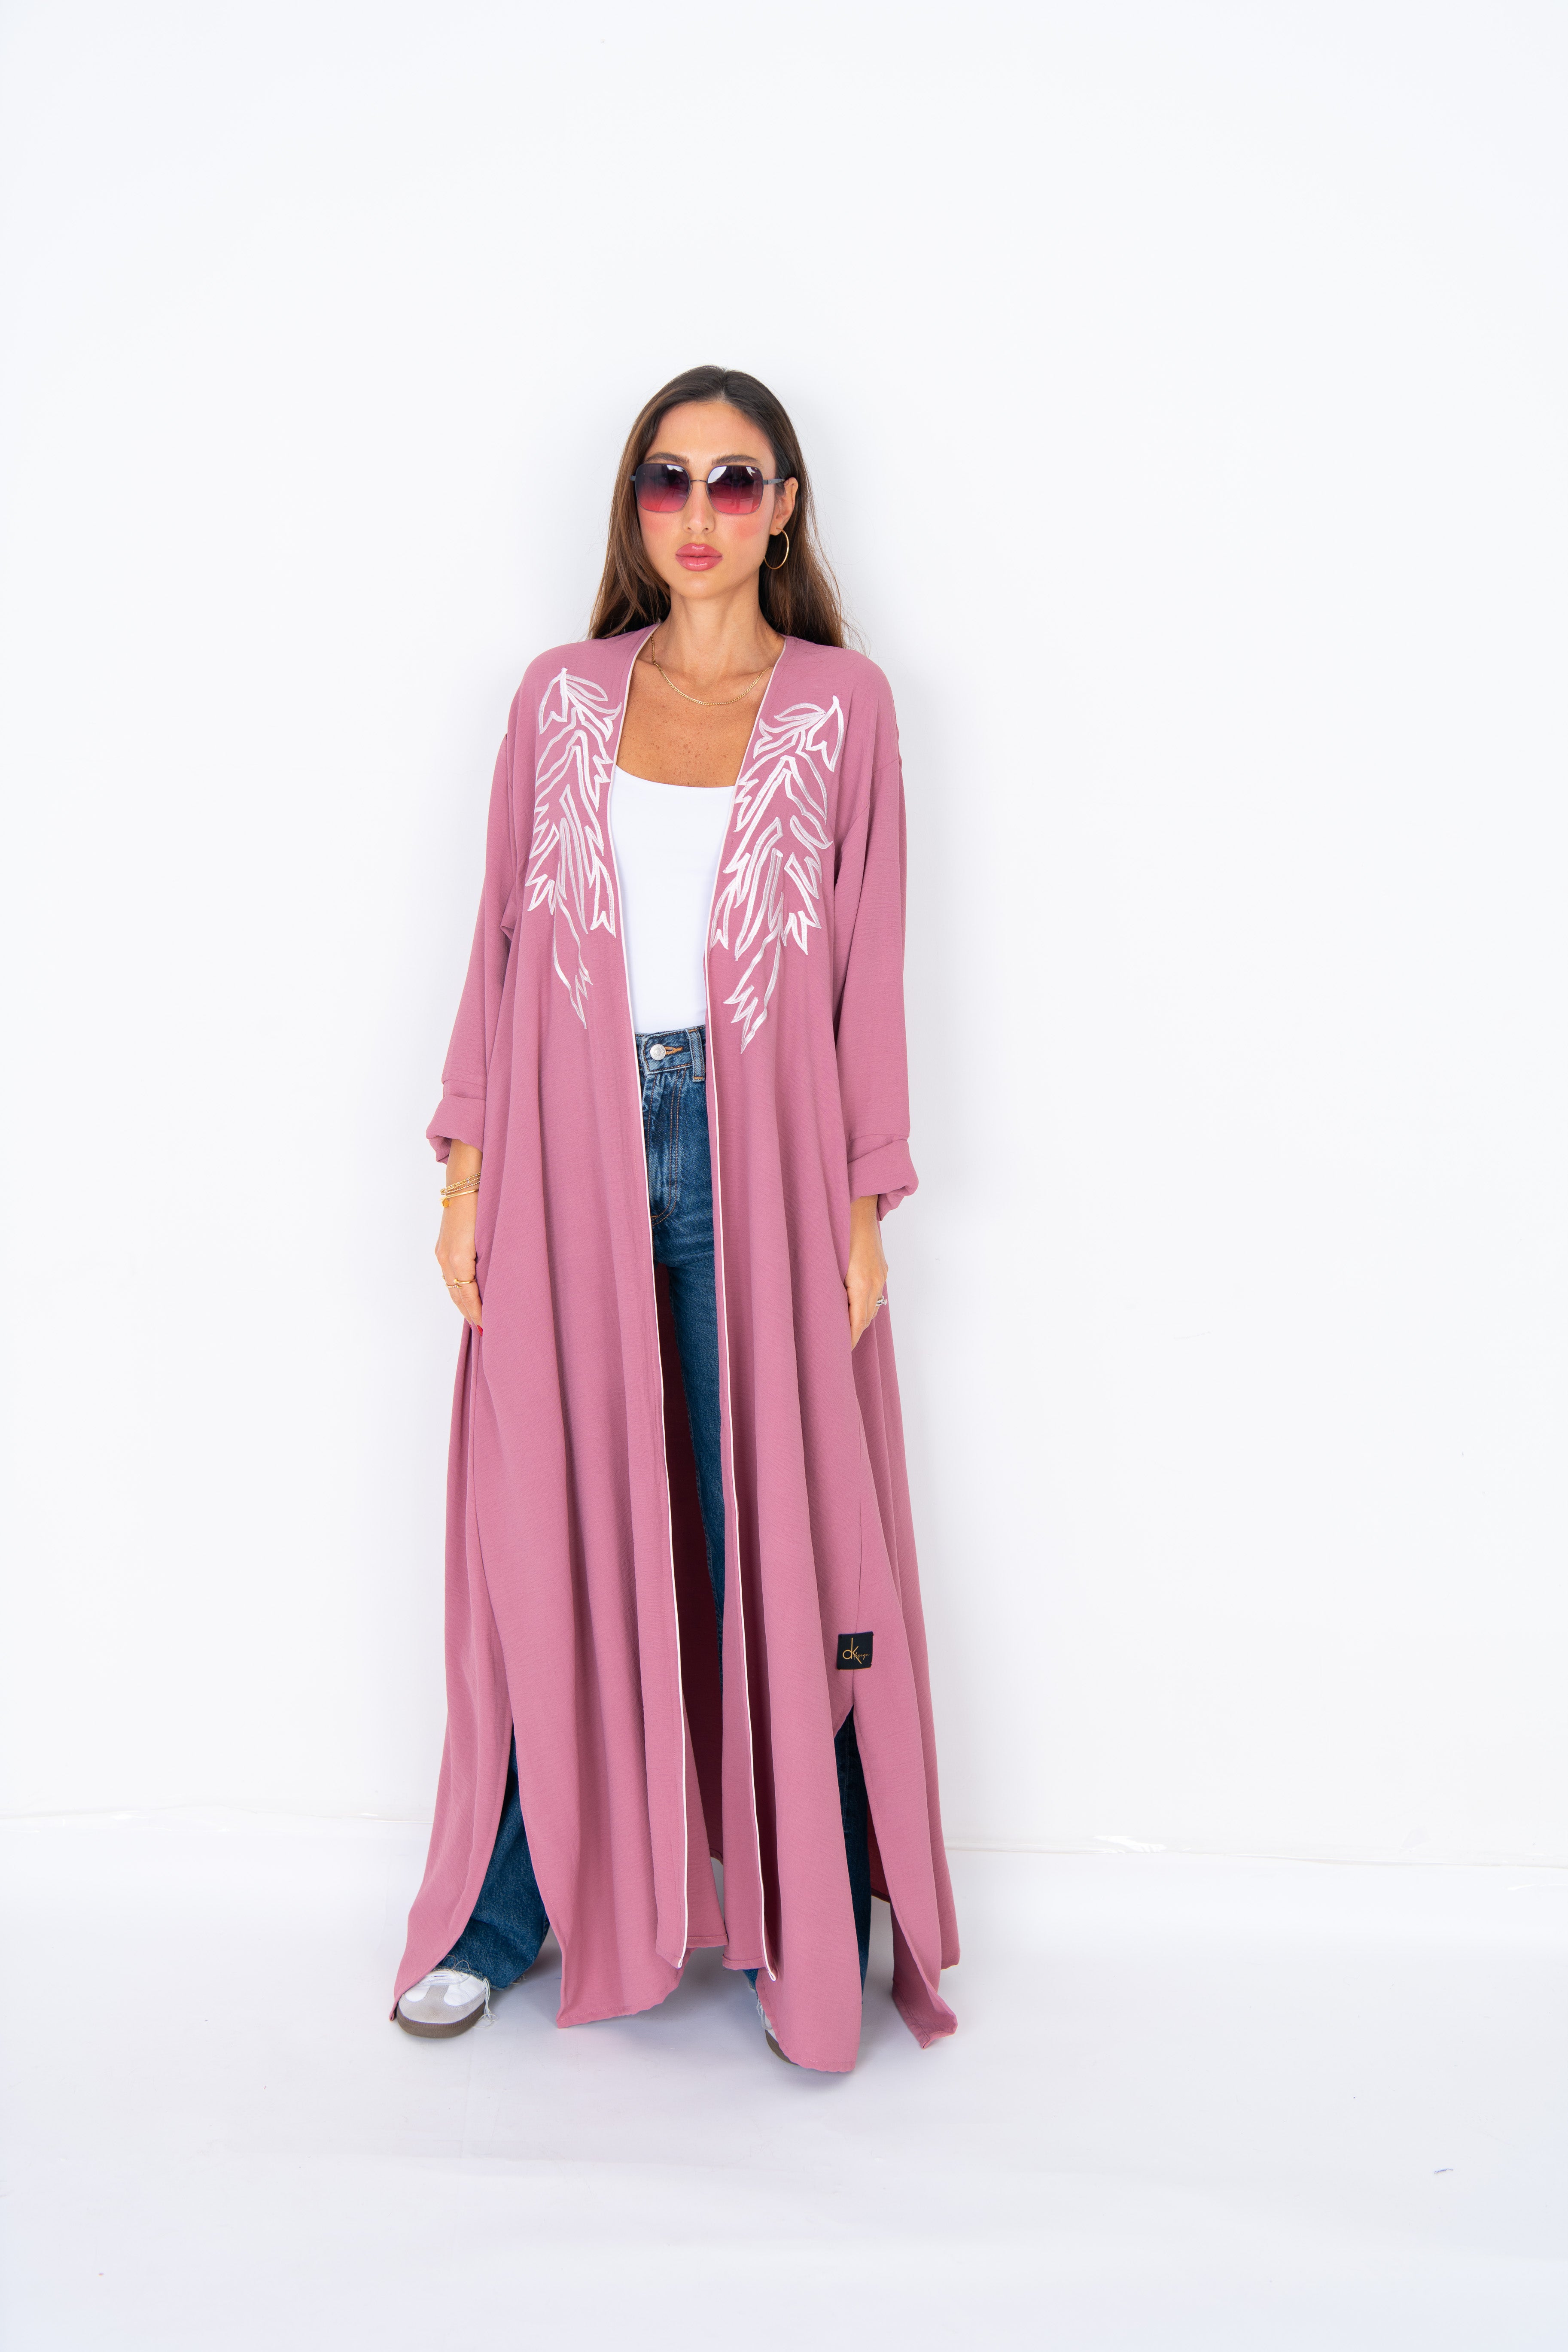 Layla Dusty Pink Crepe Abaya with White Embroidery